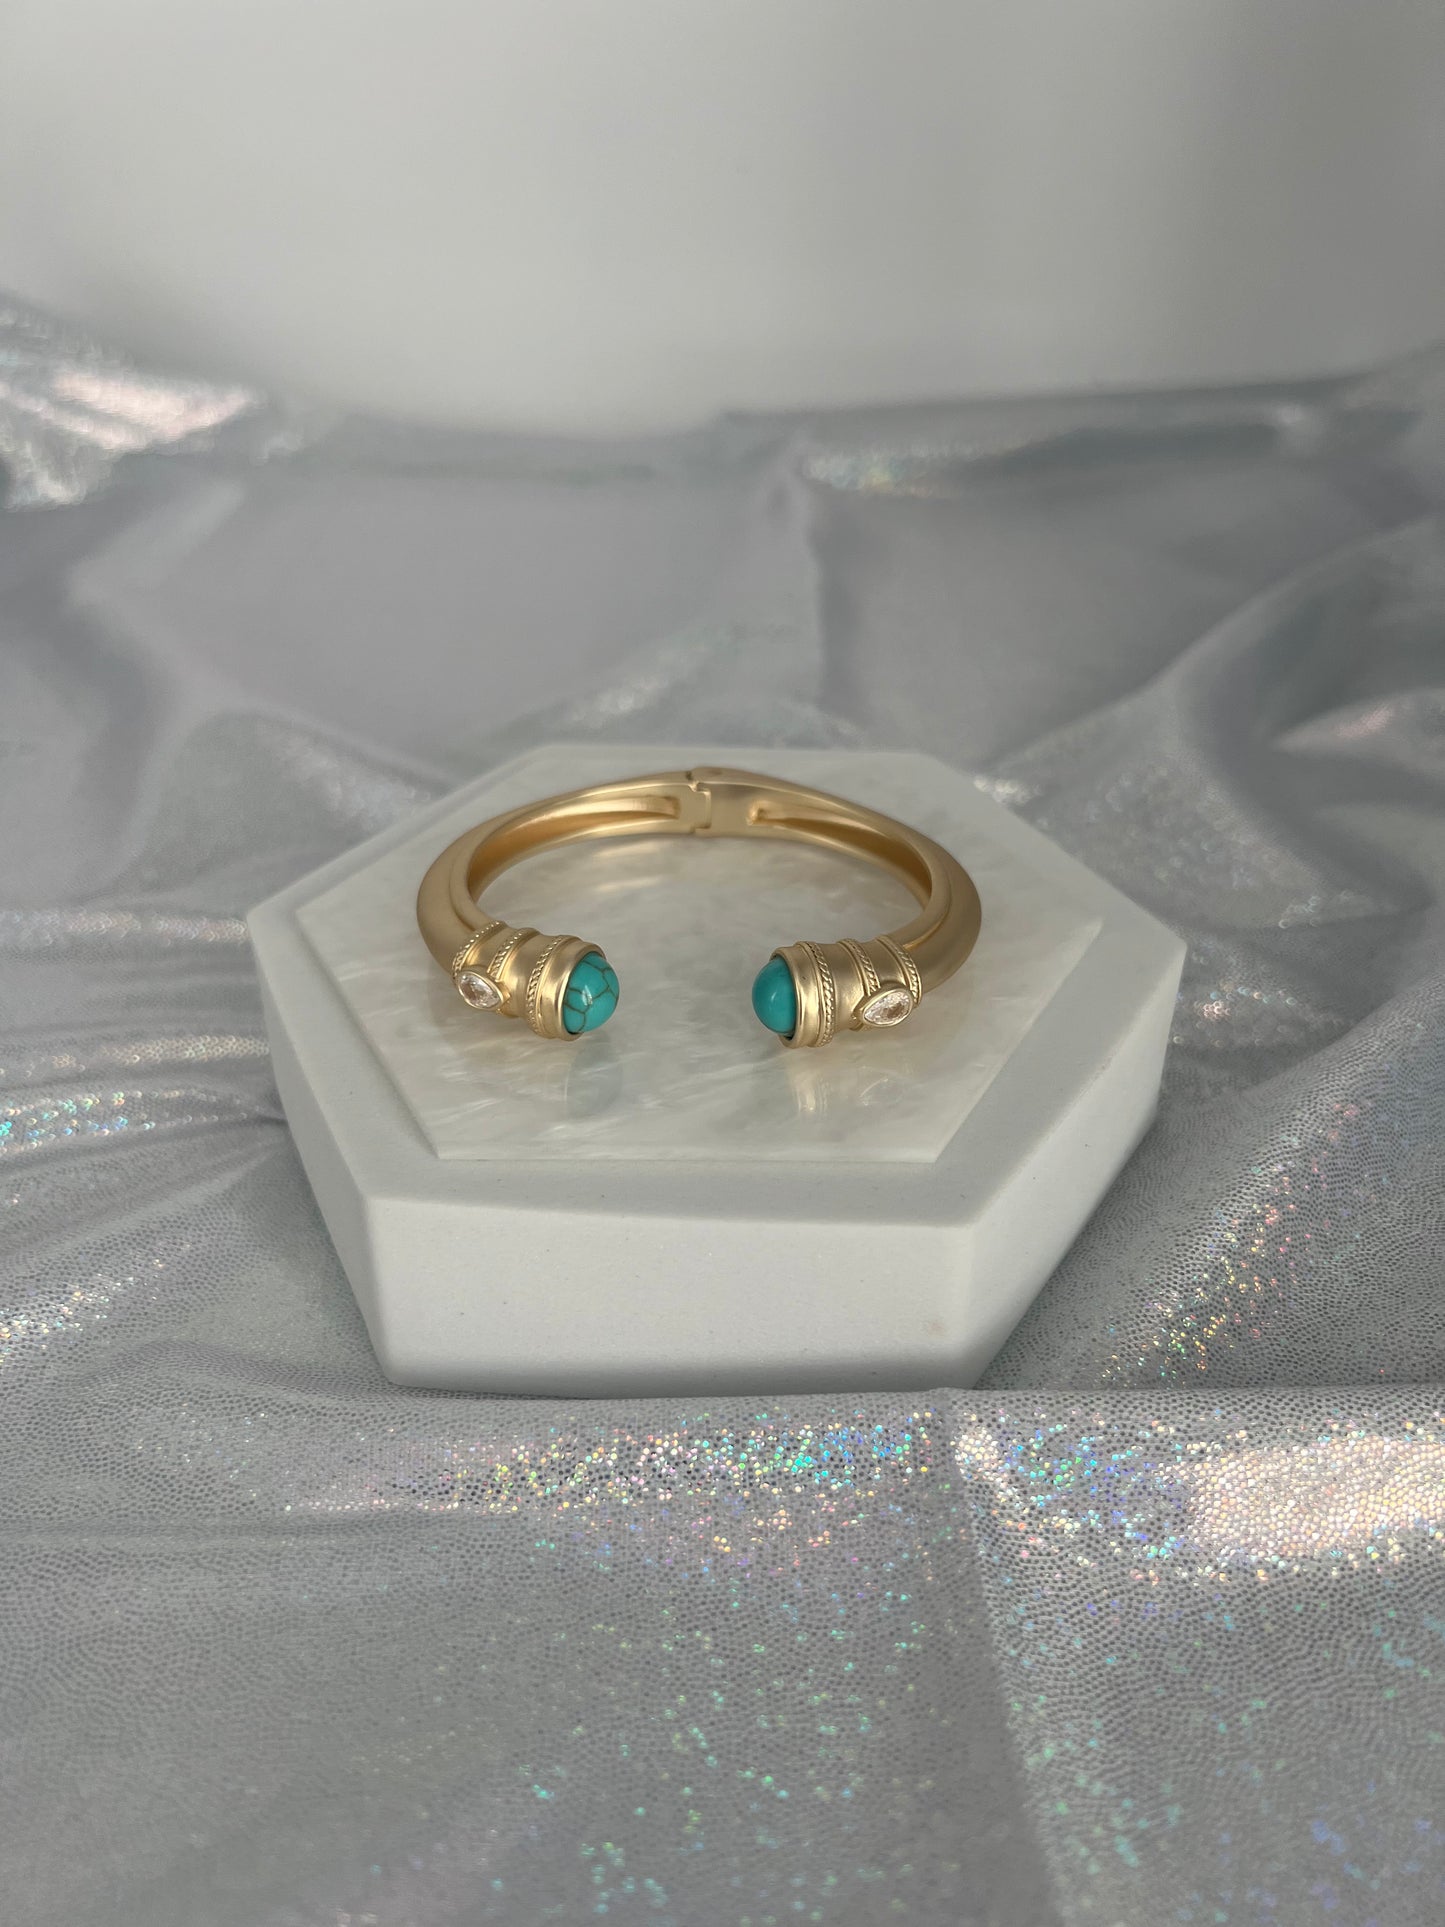 Matte Gold Cuff Bracelet with Turquoise Ends